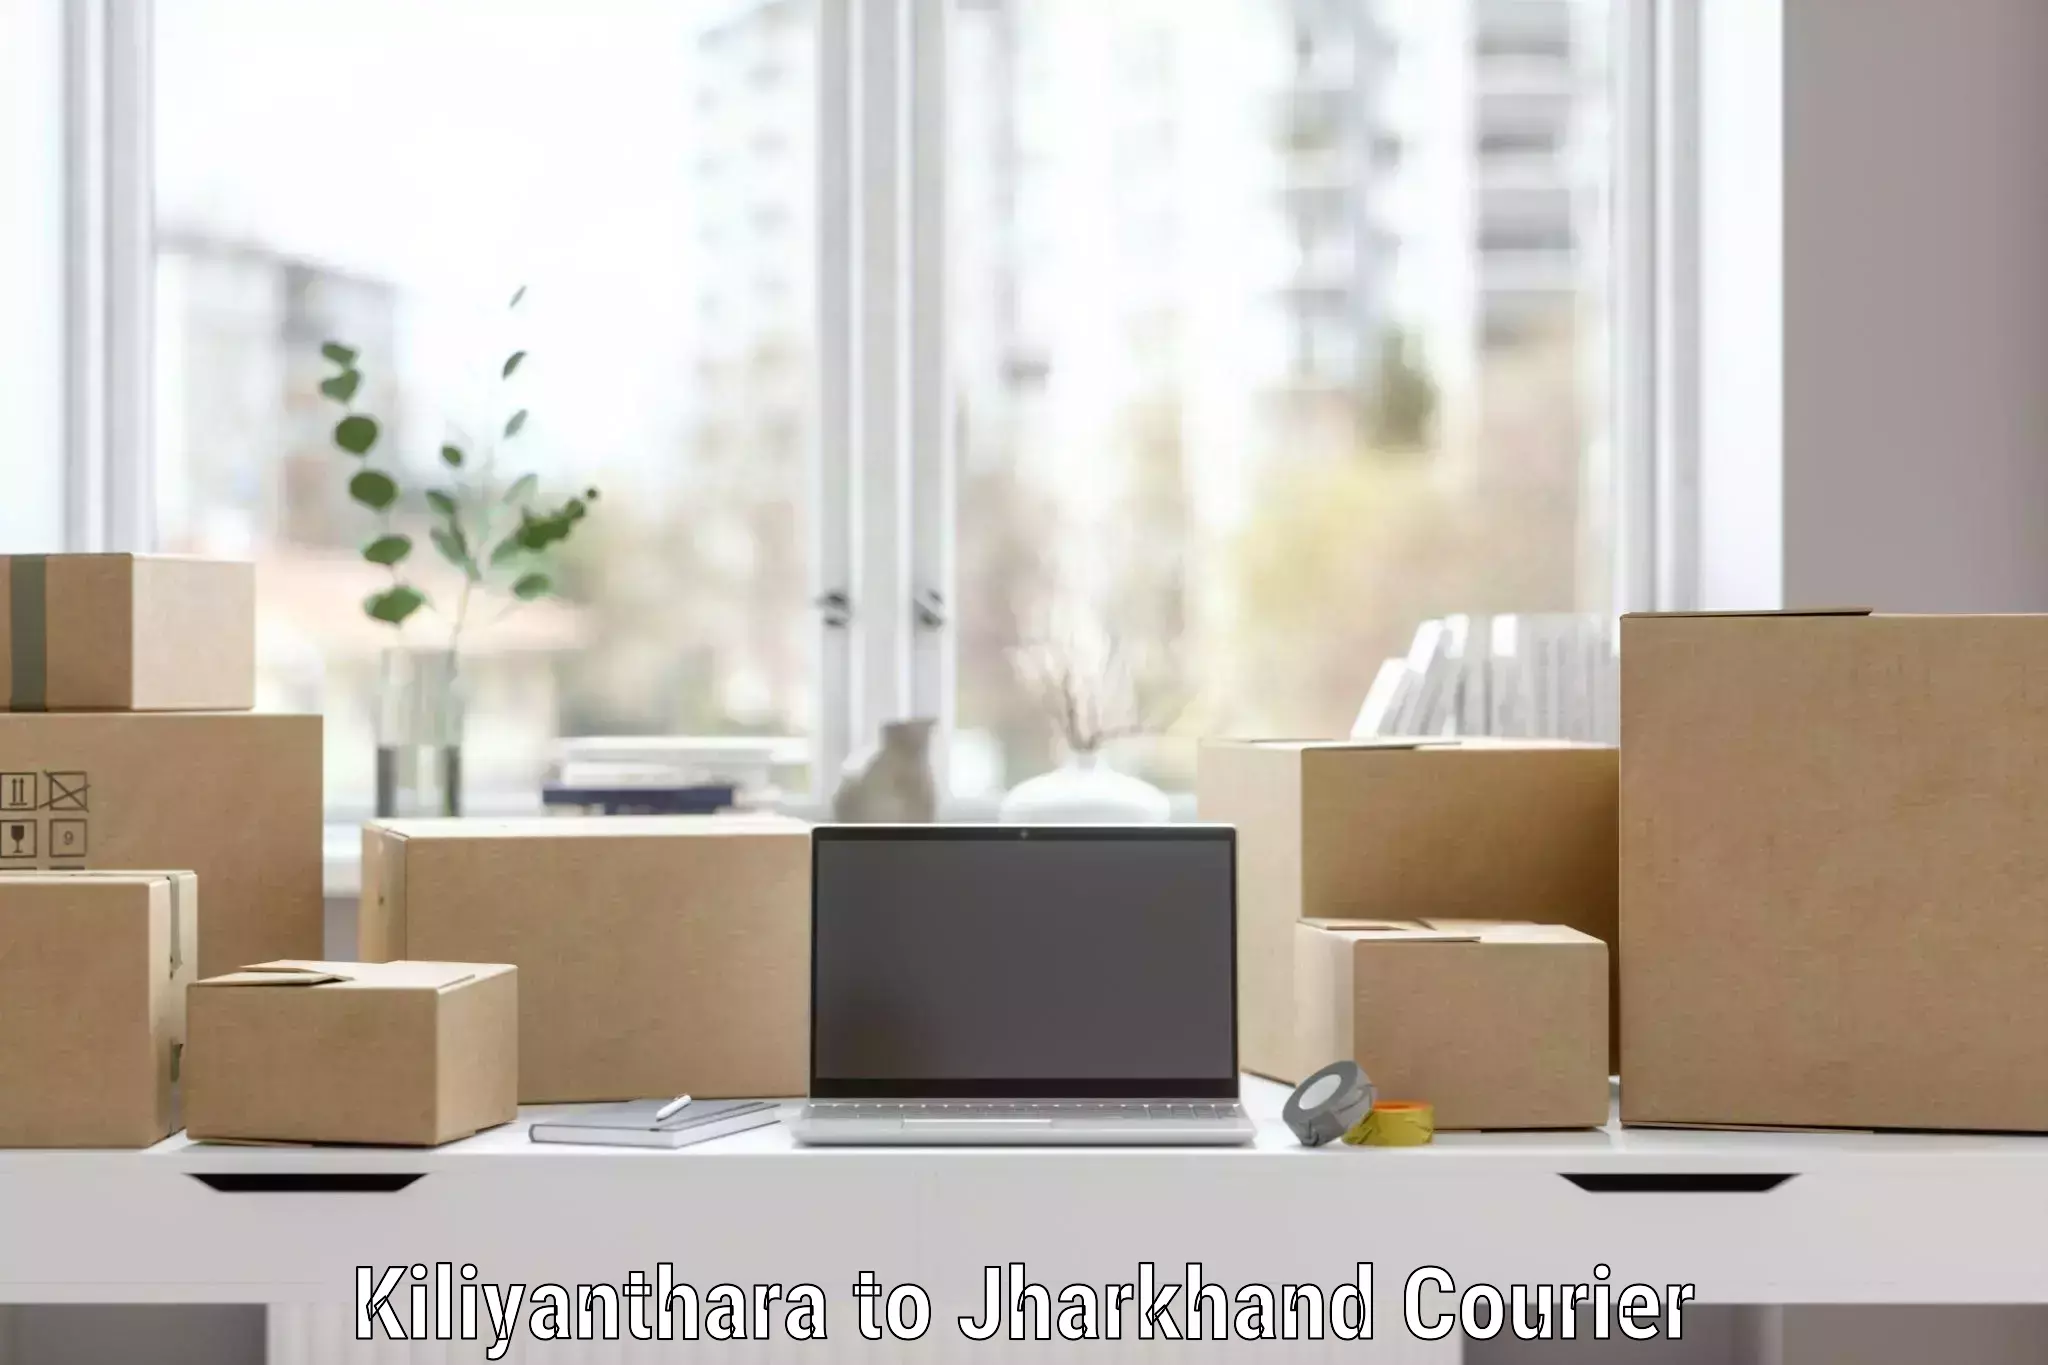 Quality relocation services in Kiliyanthara to Jharkhand